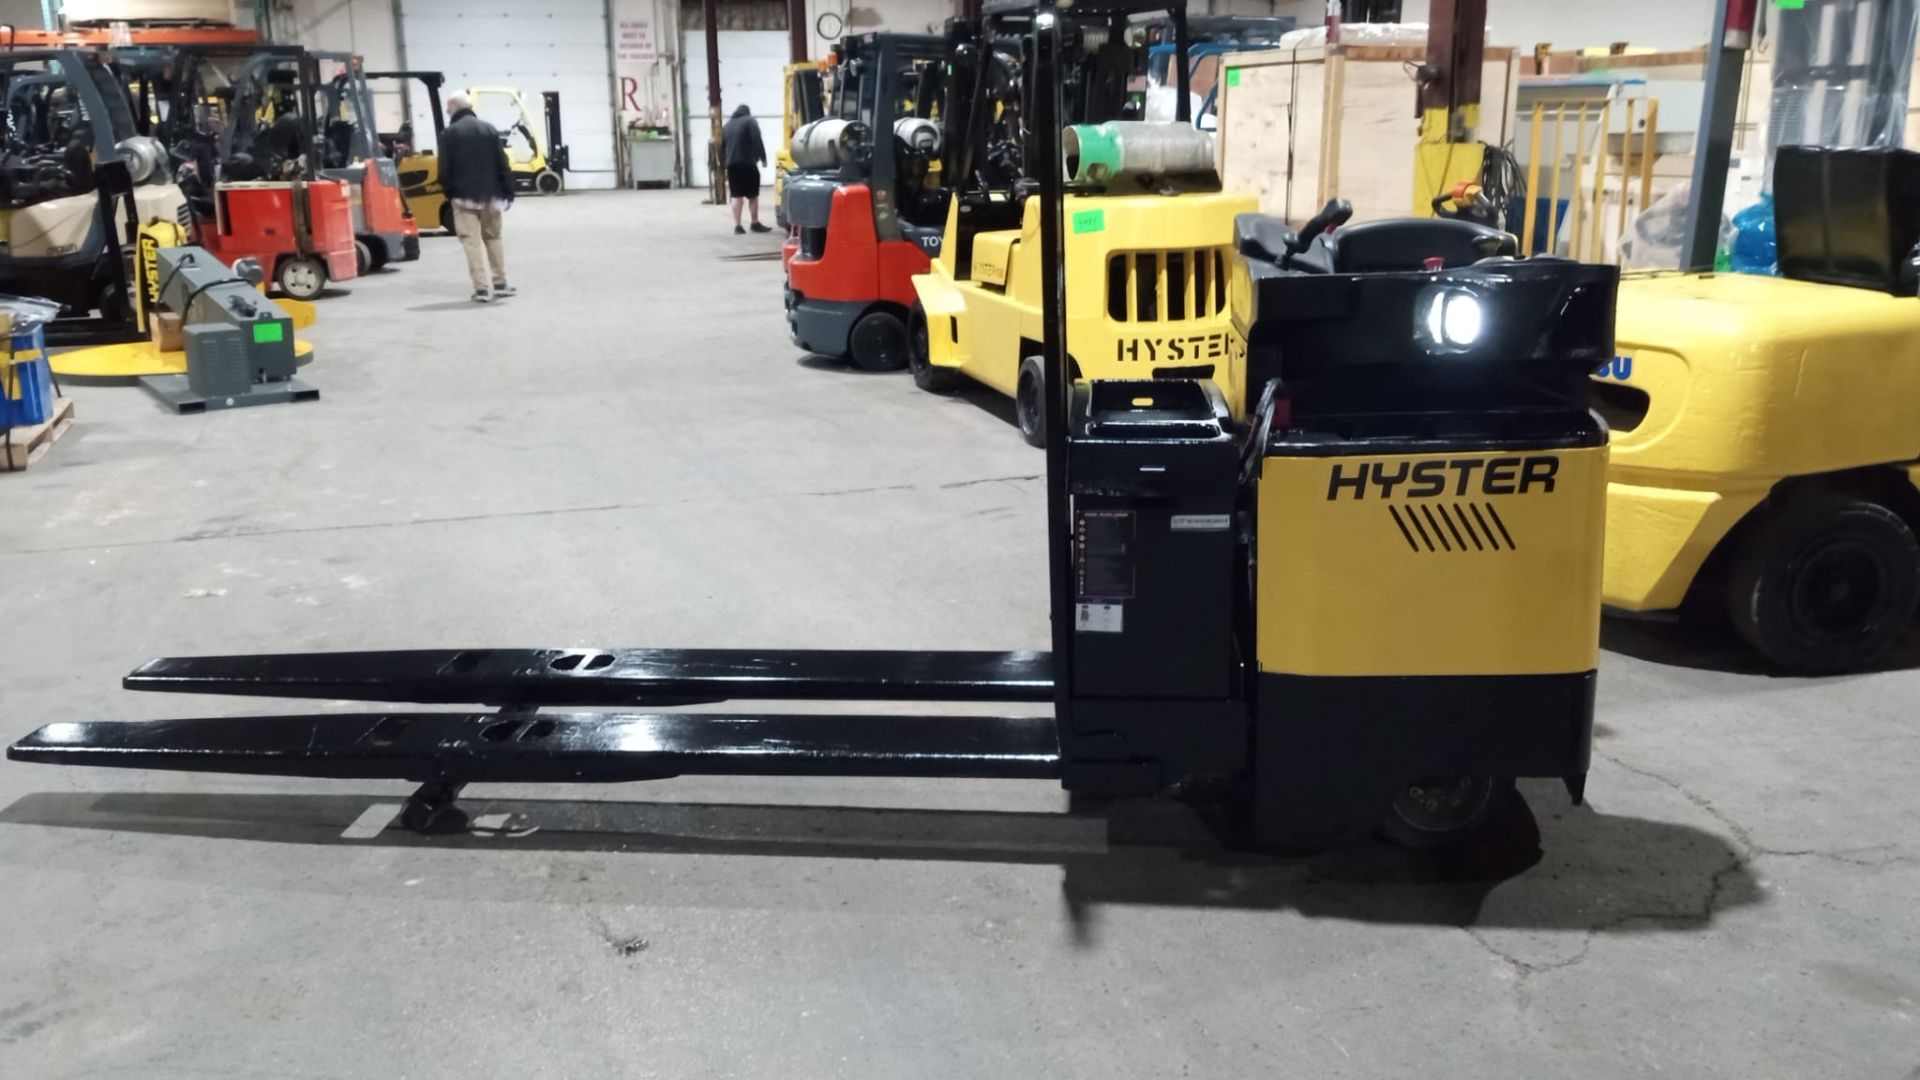 2015 Hyster RIDE ON 8000lbs capacity LONG JOHN 8' Long Forks Powered Pallet Cart 24V - Ride on unit - Image 3 of 7